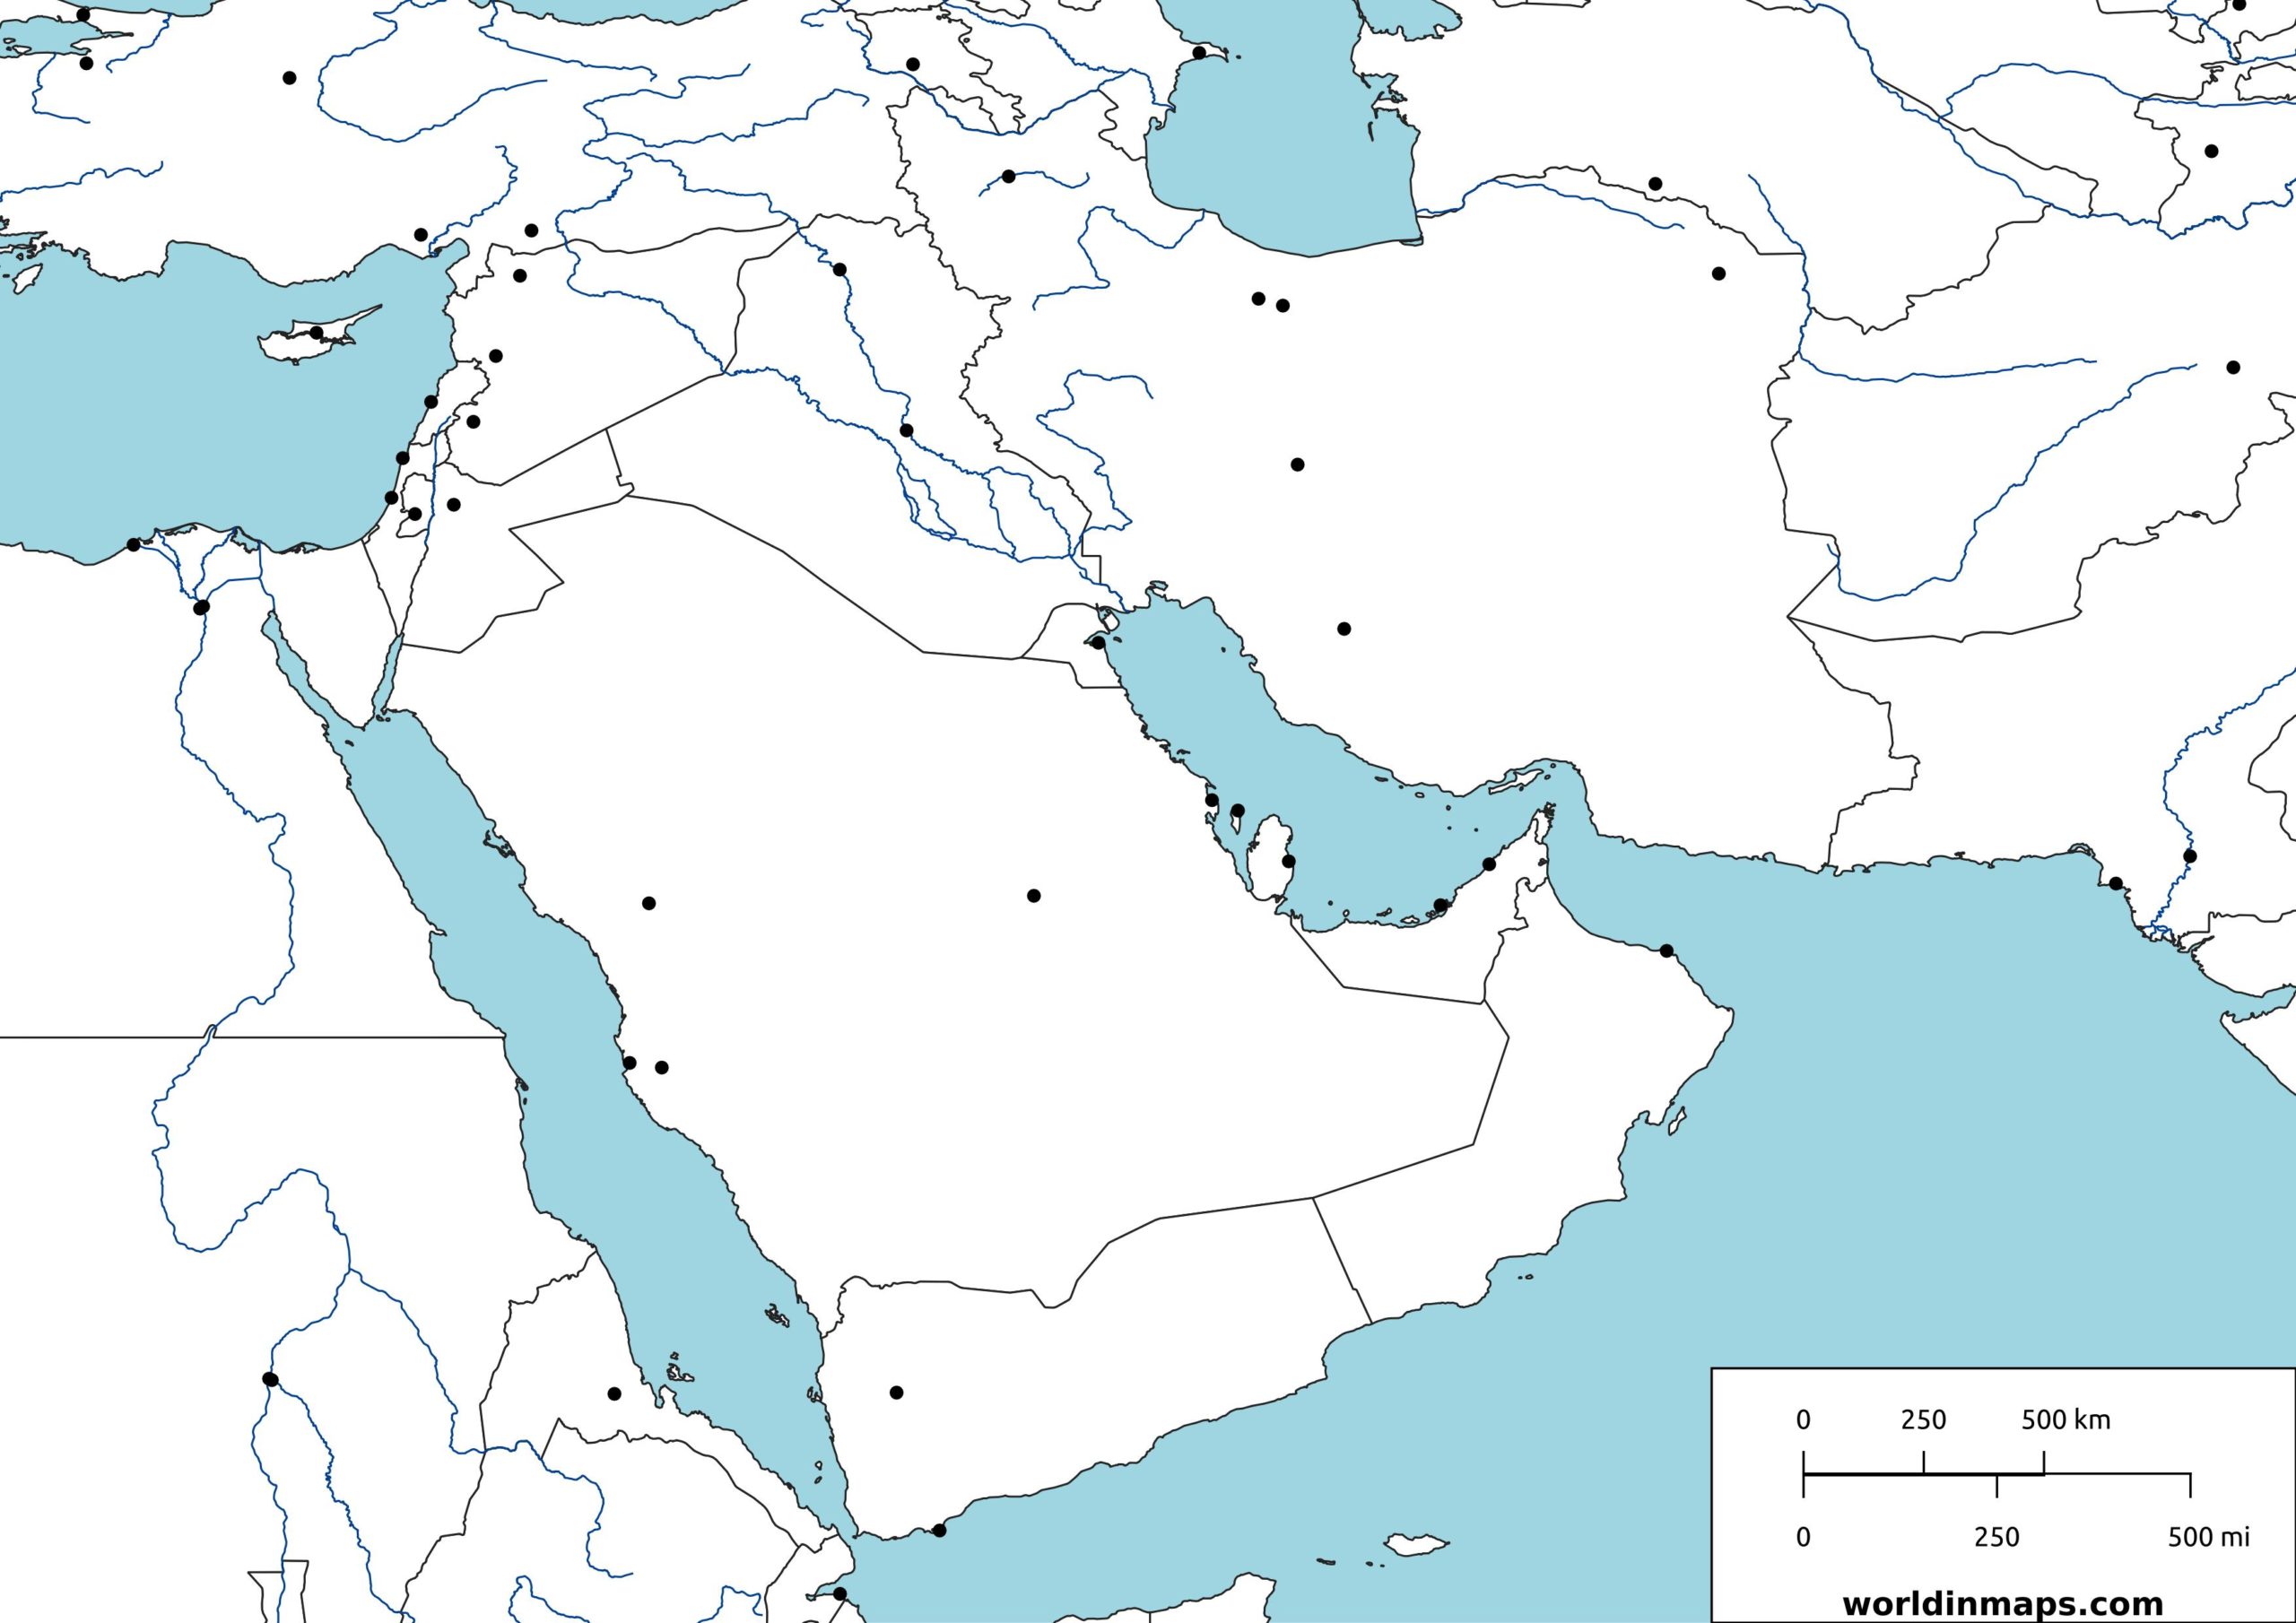 middle-east-world-in-maps